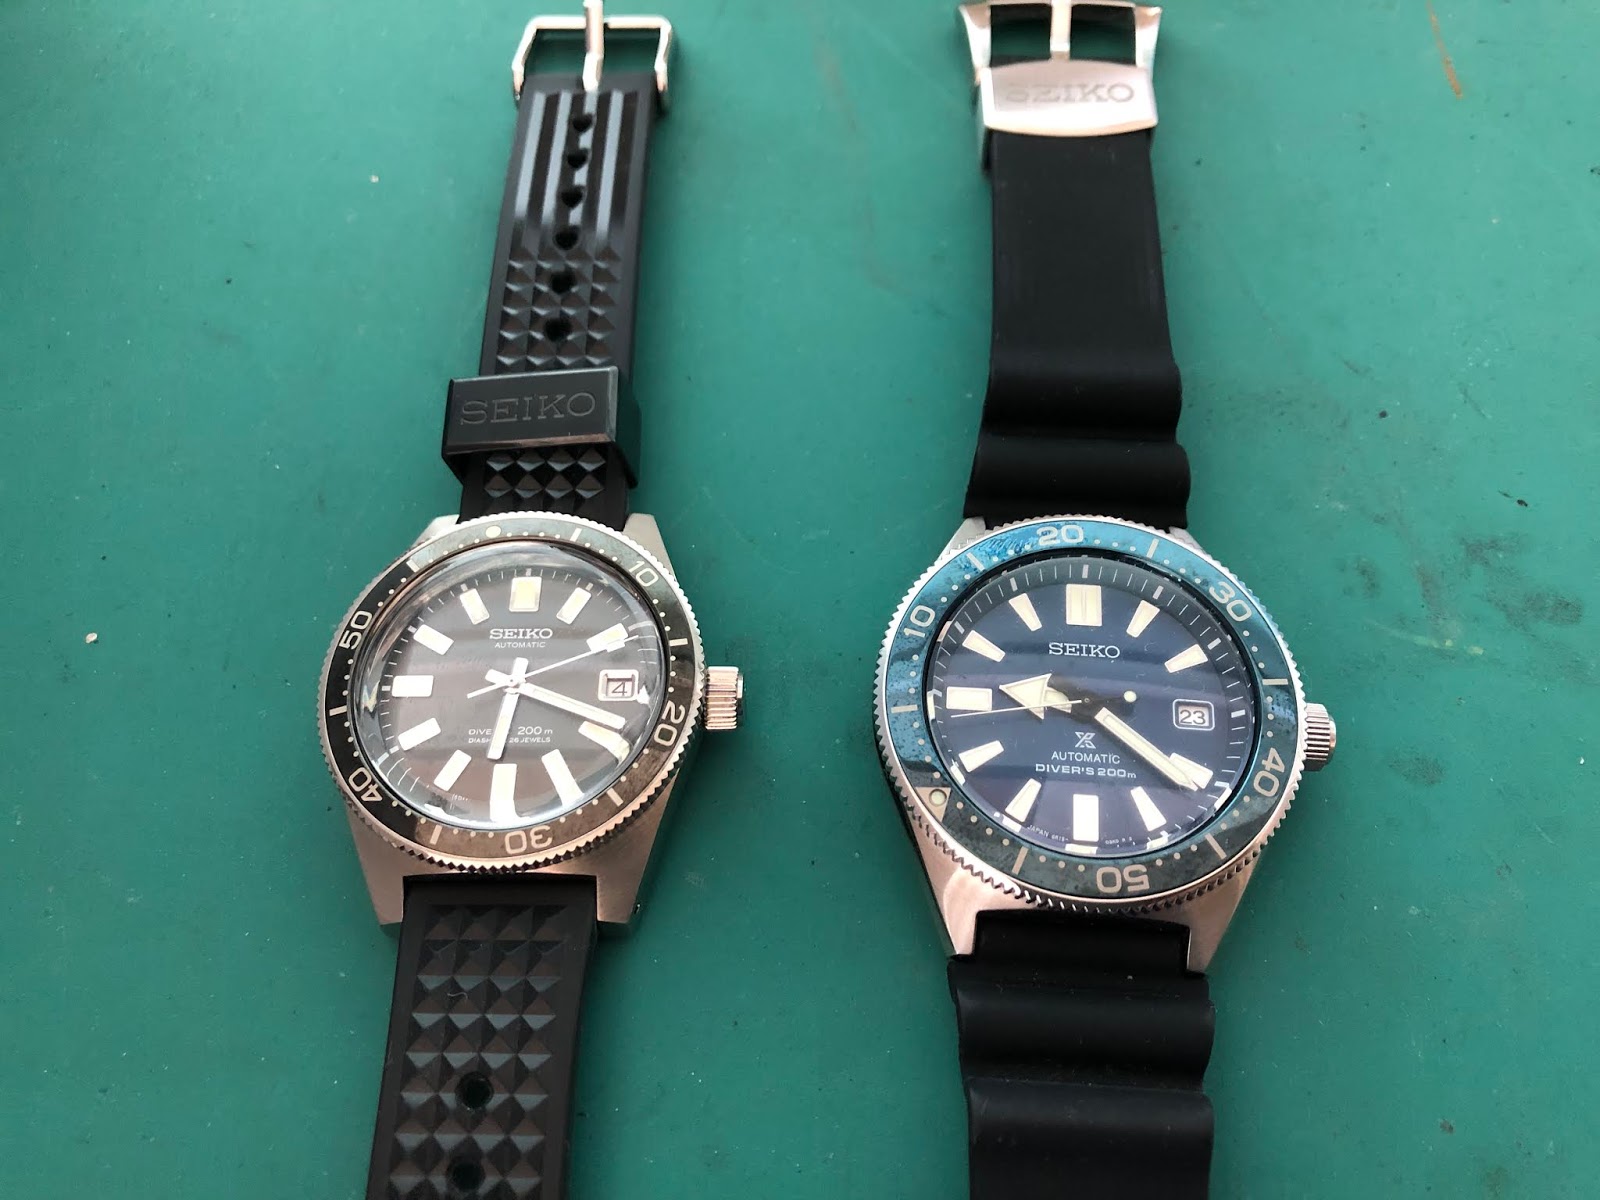 My Eastern Watch Head-To-Head: Seiko SLA017, a HOMAGE to the 62MAS versus the SBDC053, a REMAKE to the 62MAS